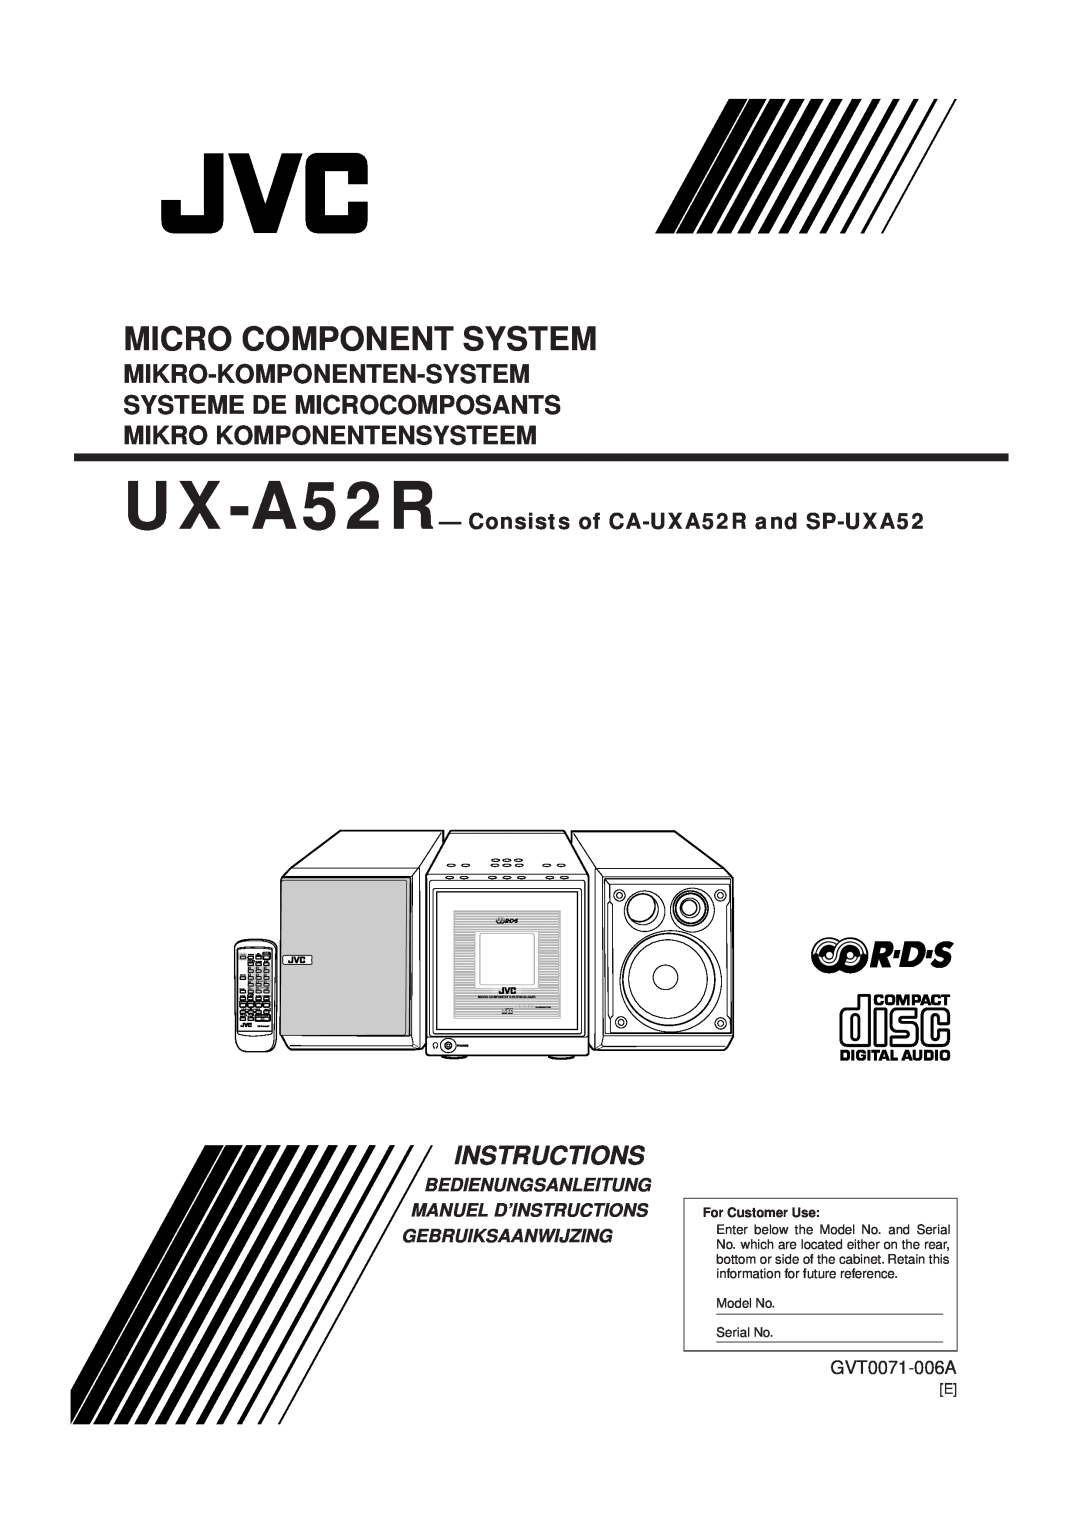 JVC manual UX-A52R-Consists of CA-UXA52Rand SP-UXA52, GVT0071-006A, Micro Component System, Mikro-Komponenten-System 